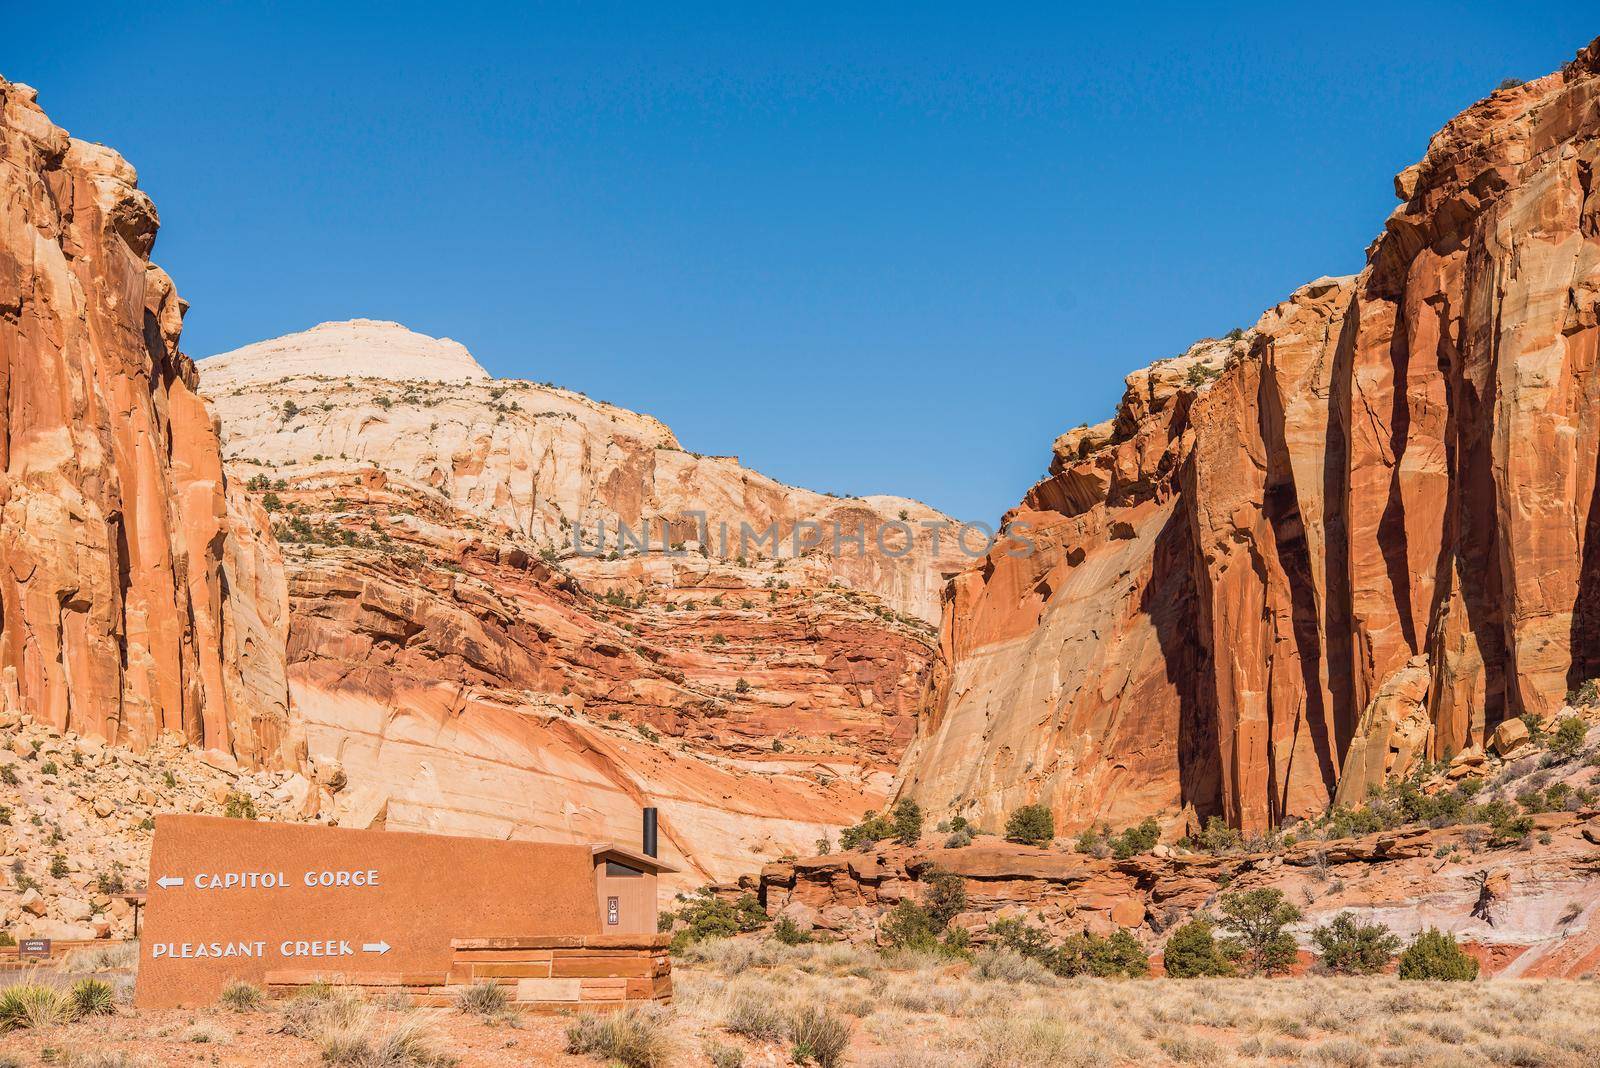 Capitol Gorge and Pleasant Creek Trails Sign in Capitol Reef National Park, Utah, United States.